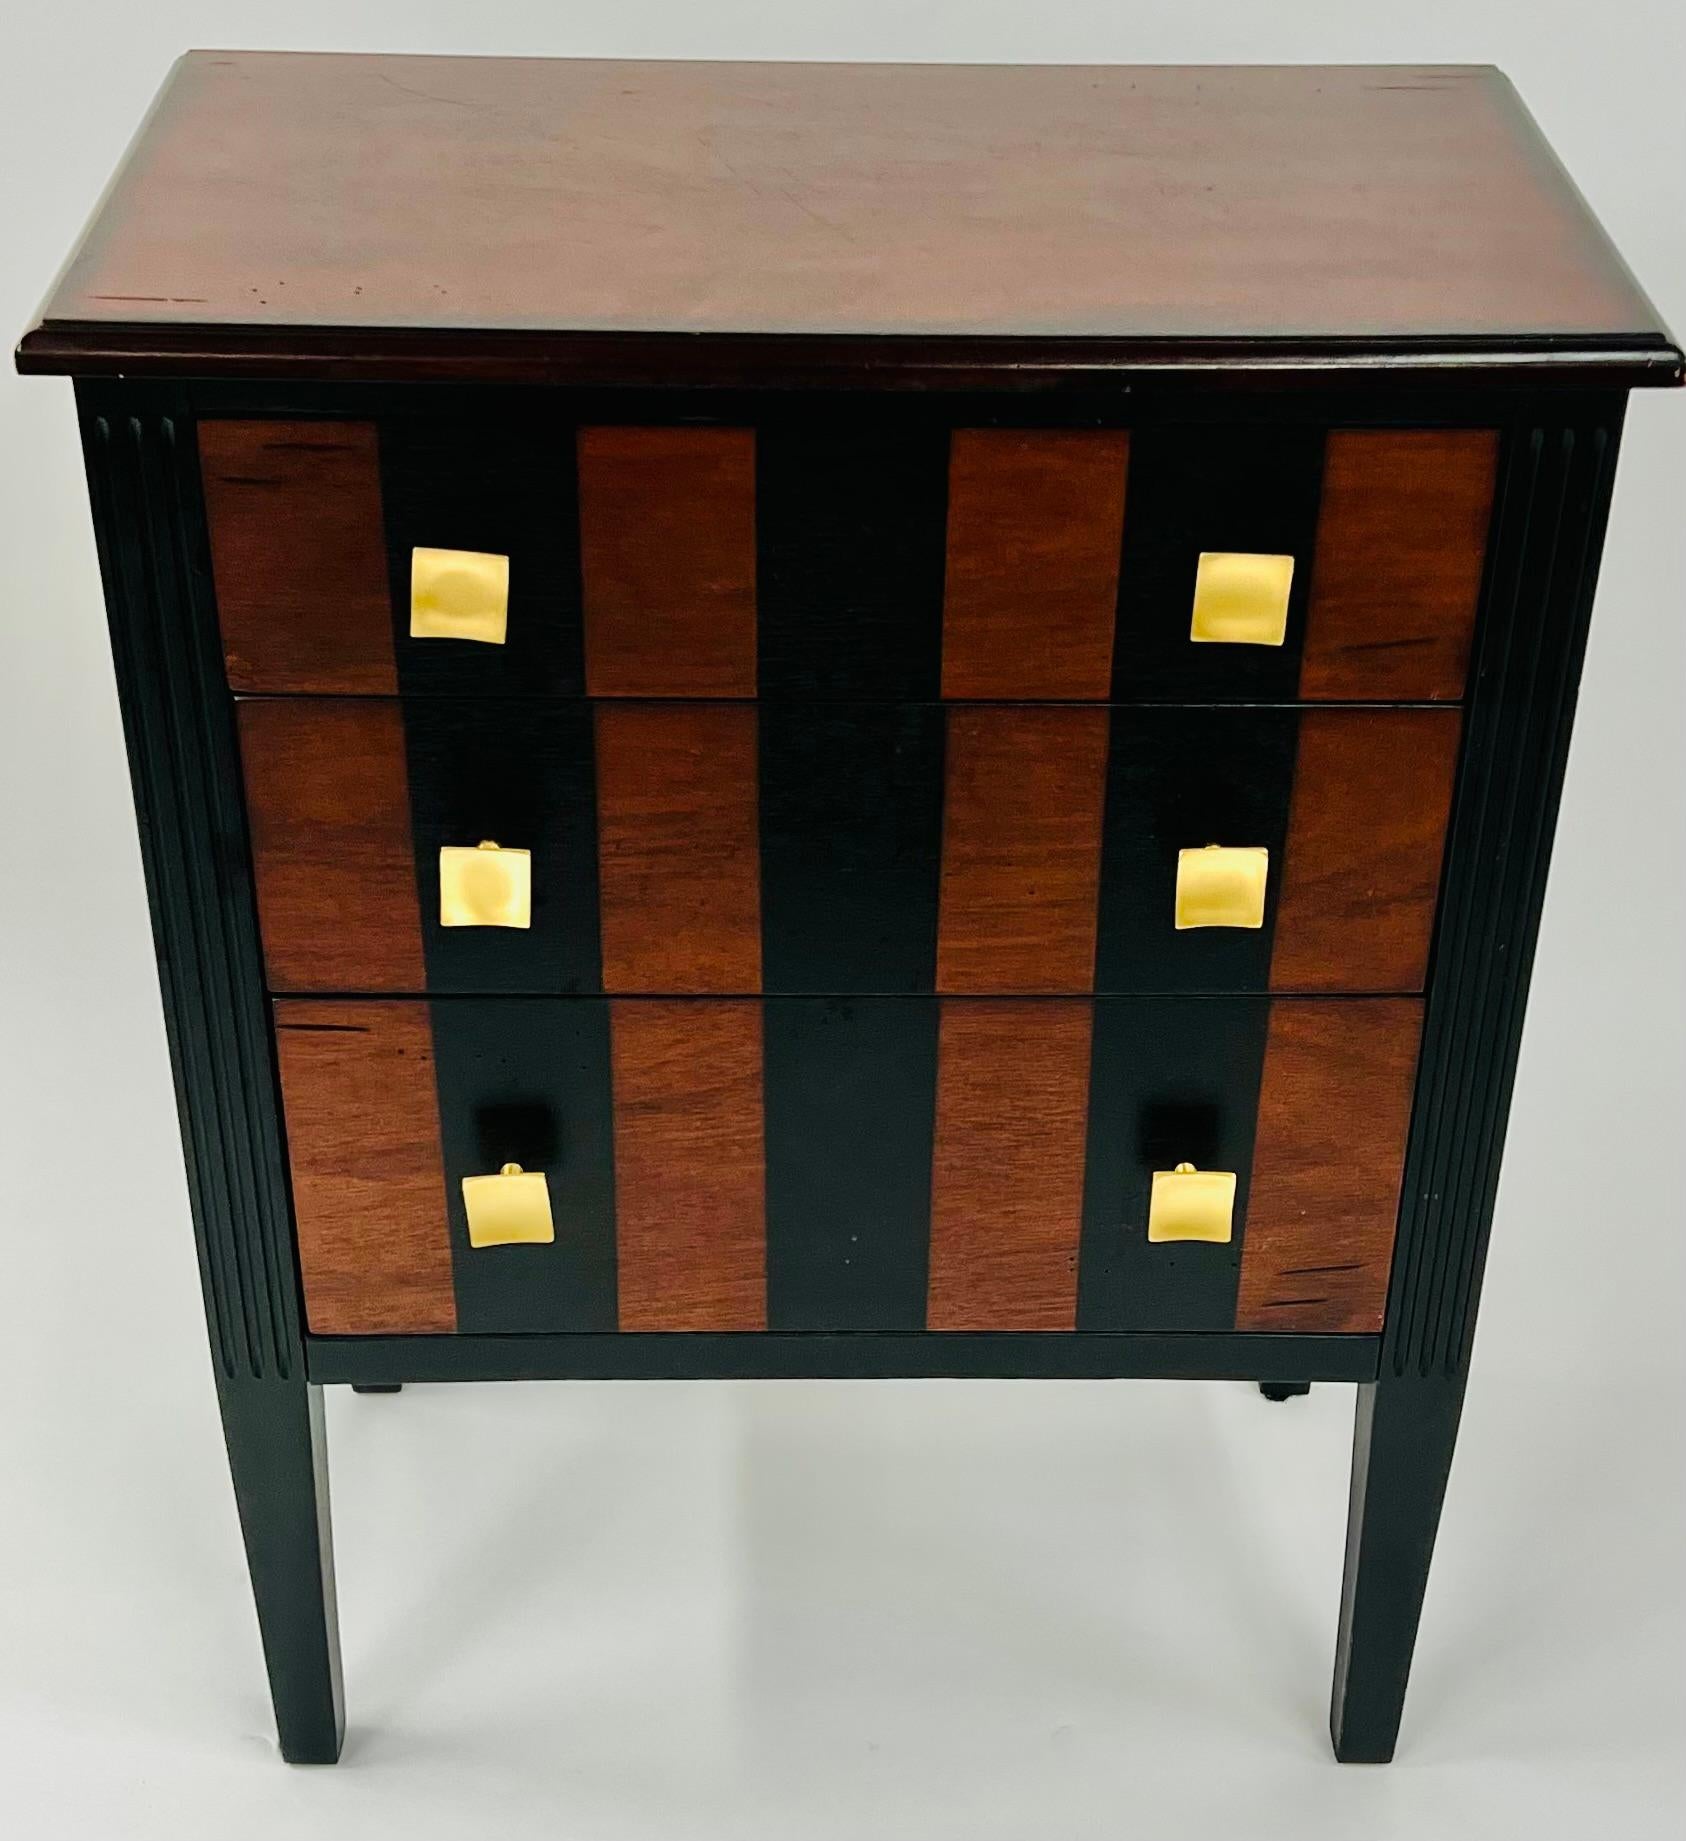 20th Century Art Deco Style Rosewood Three Drawer Nightstand, End or Side Table, a Pair